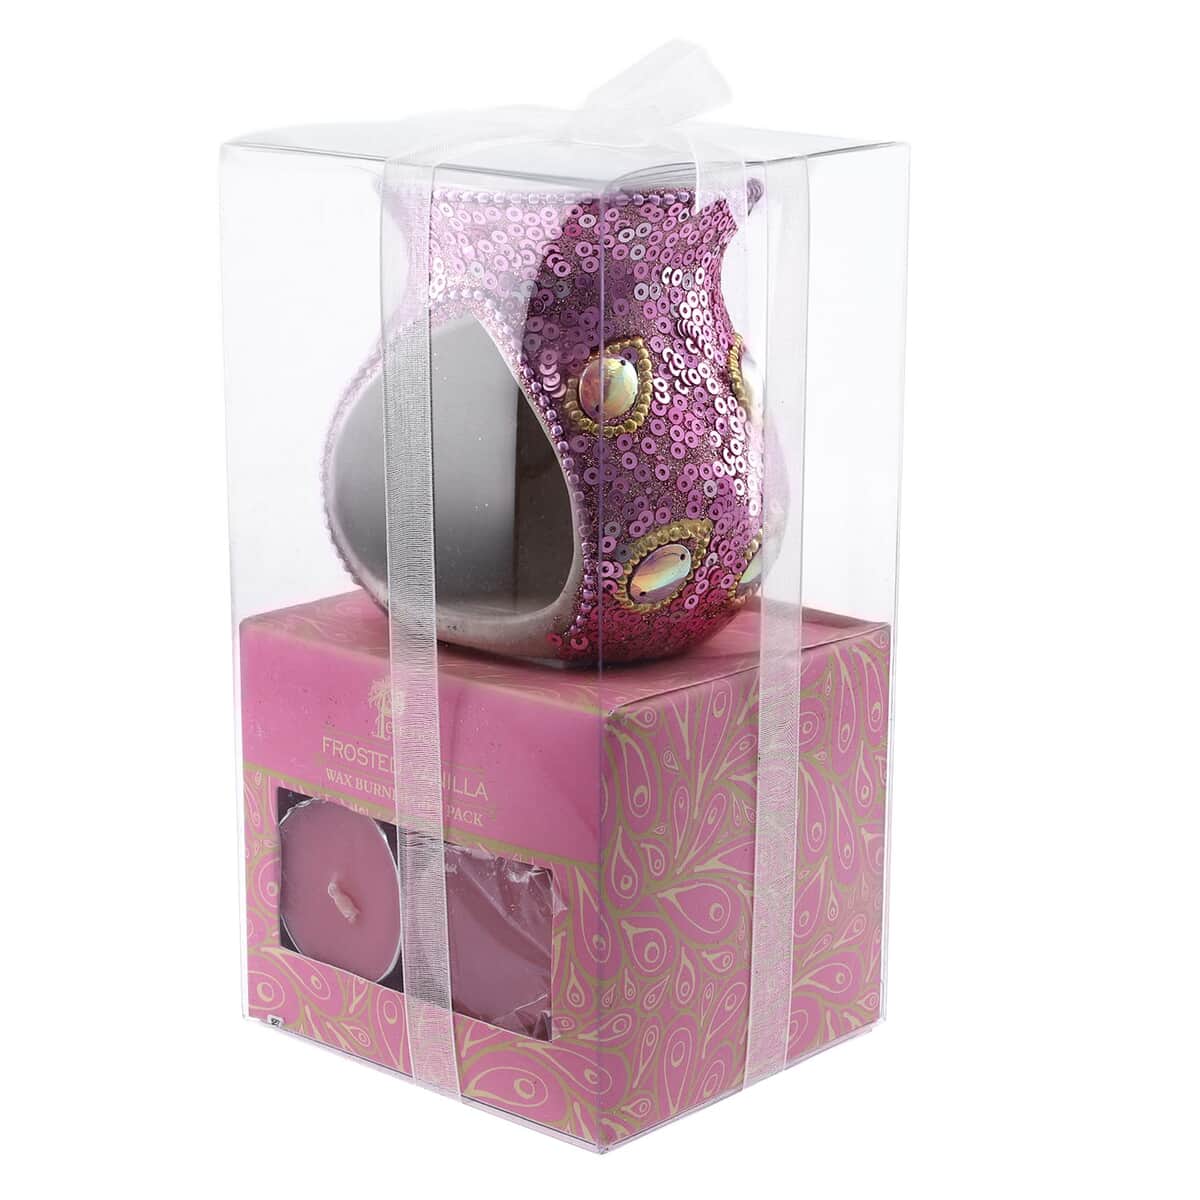 "Peacock Print Ceramic Wax Tart Burner Set  Fragrance: Frosted Vanilla Color: Pink Size: 3X3X7 Inches" image number 6